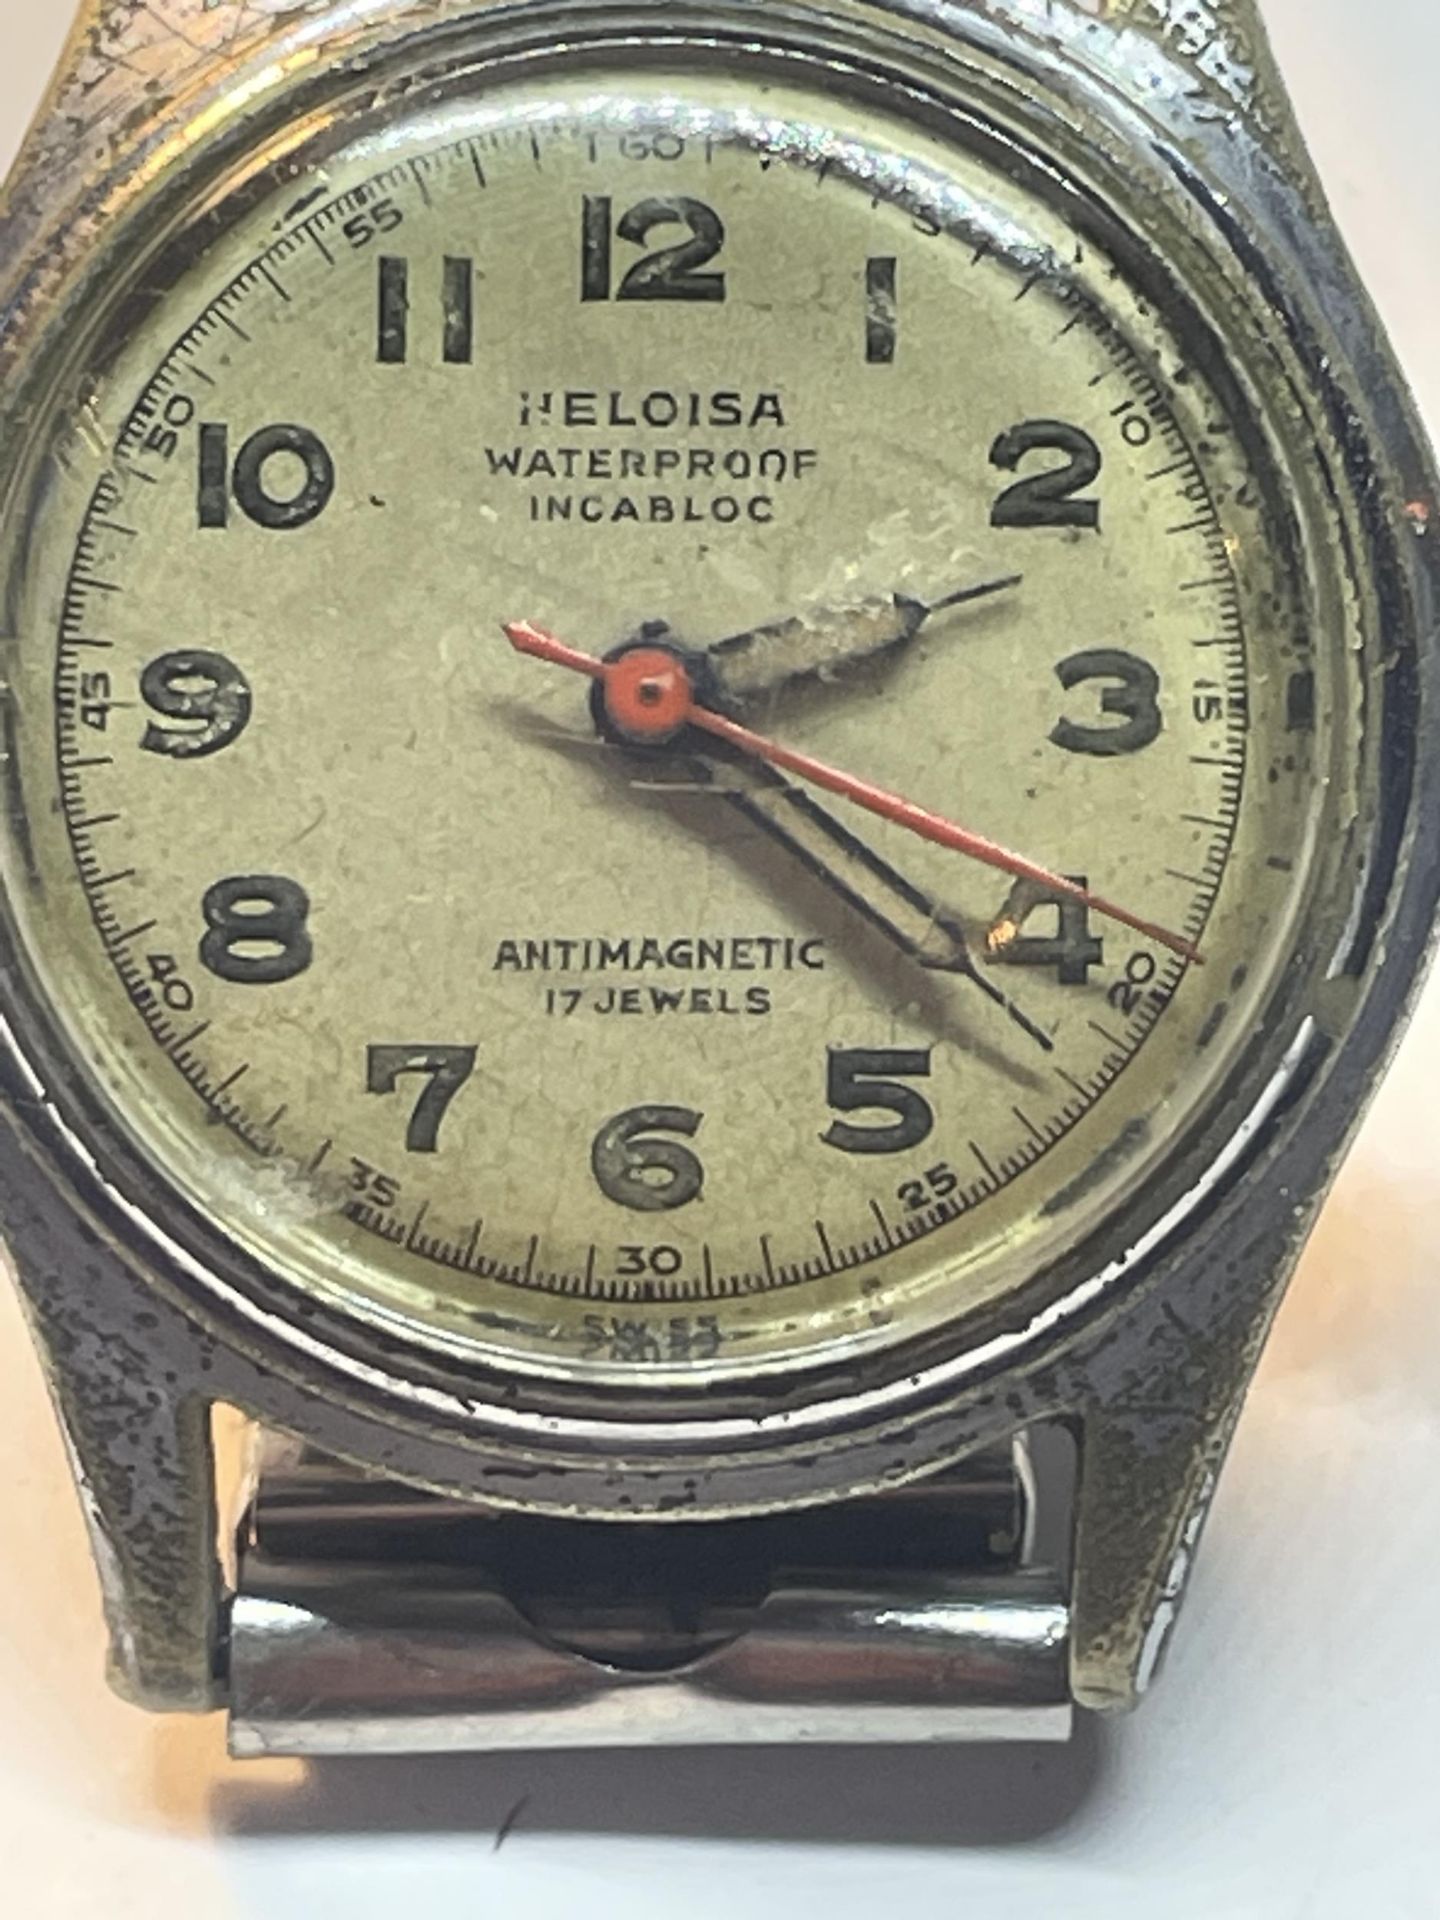 A HELOISA MILITARY STYLE WATCH SEEN WORKING BUT NO WARRANTIES - Image 2 of 3